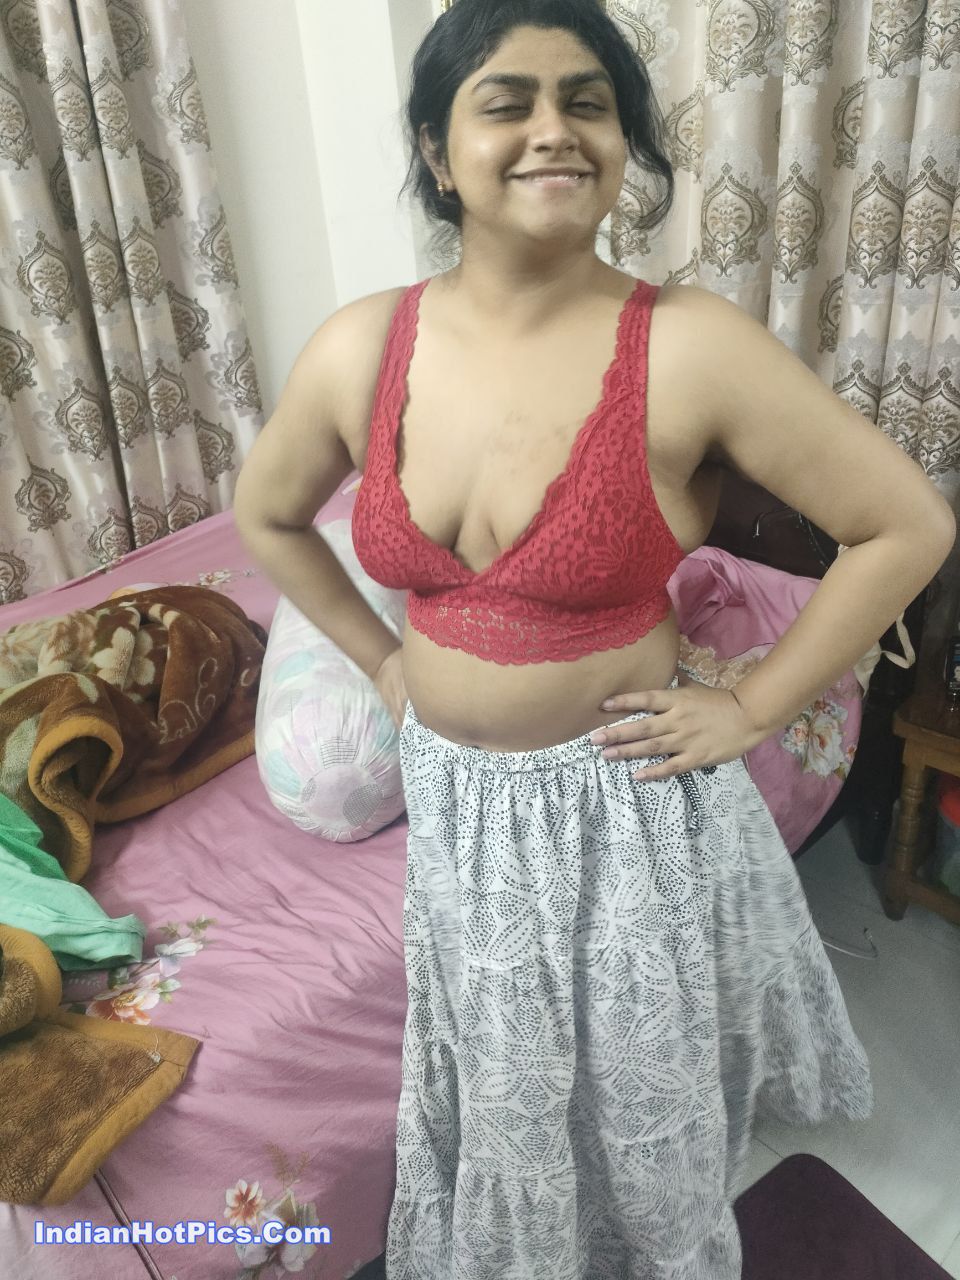 Indian Wife Nude And Sex Honeymoon Photos picture pic picture